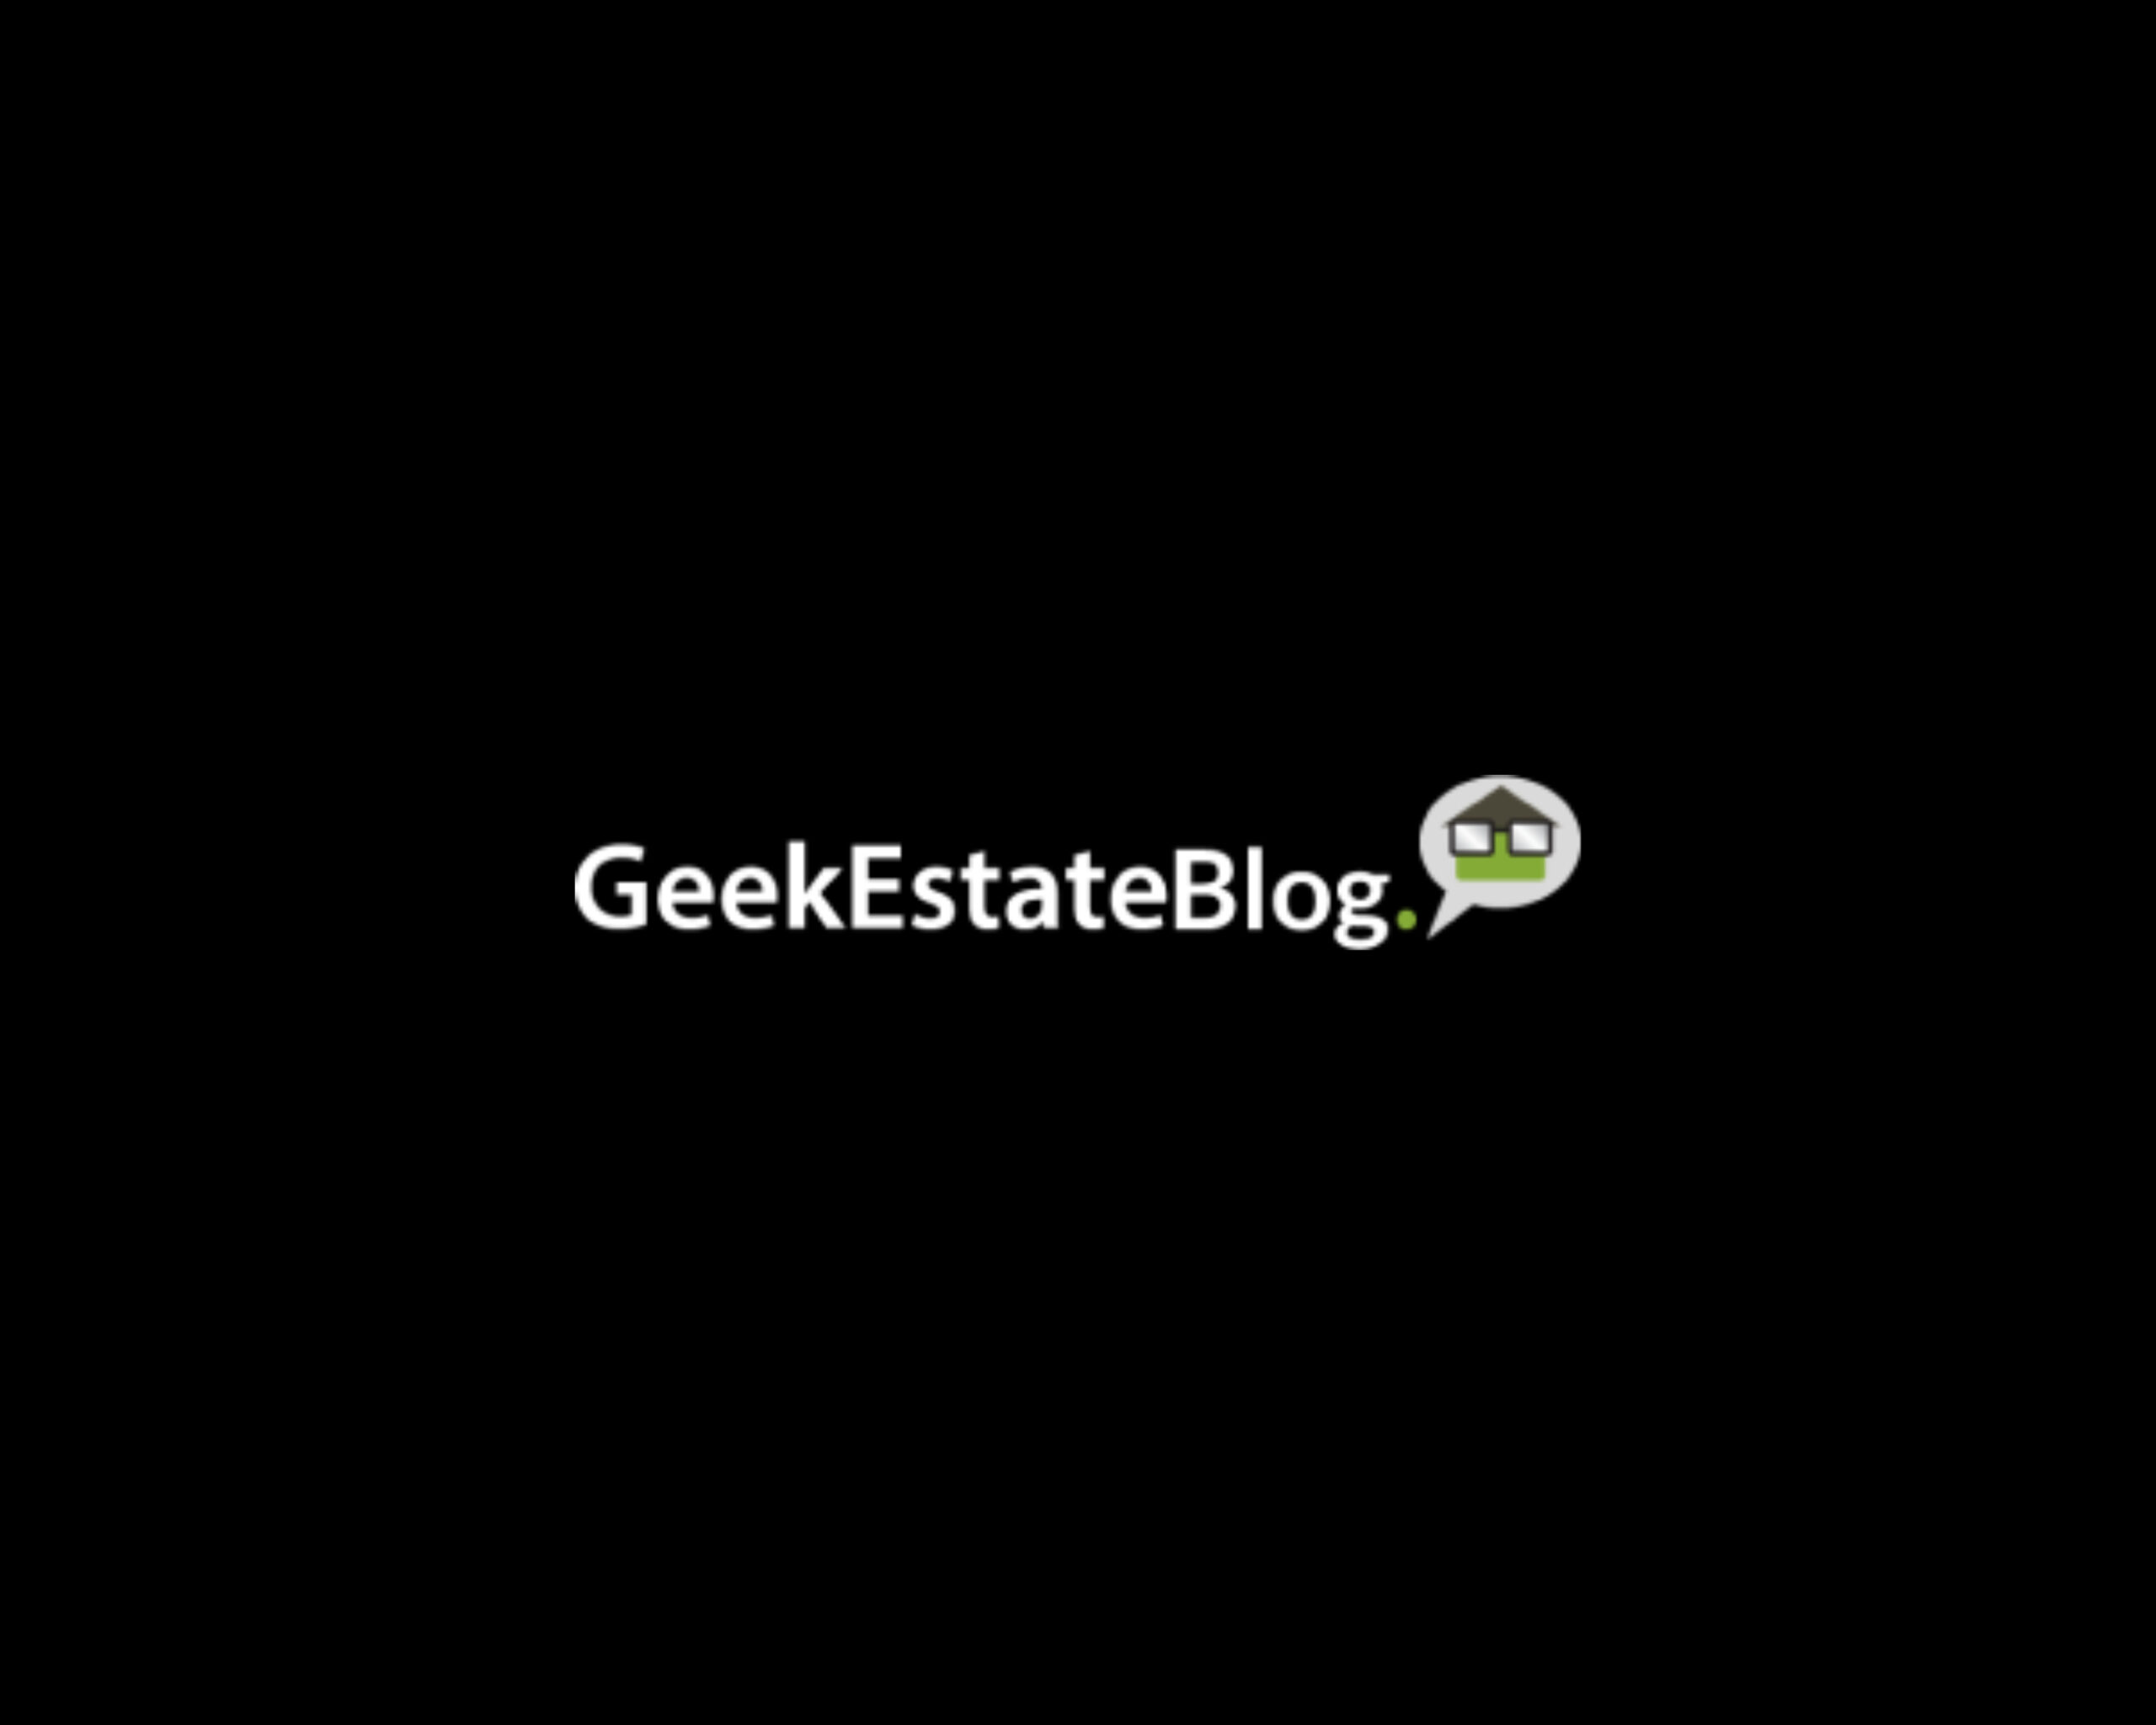 geekestateblog-miamism-offers-insiders-scoop-architecturally-significant-real-estate